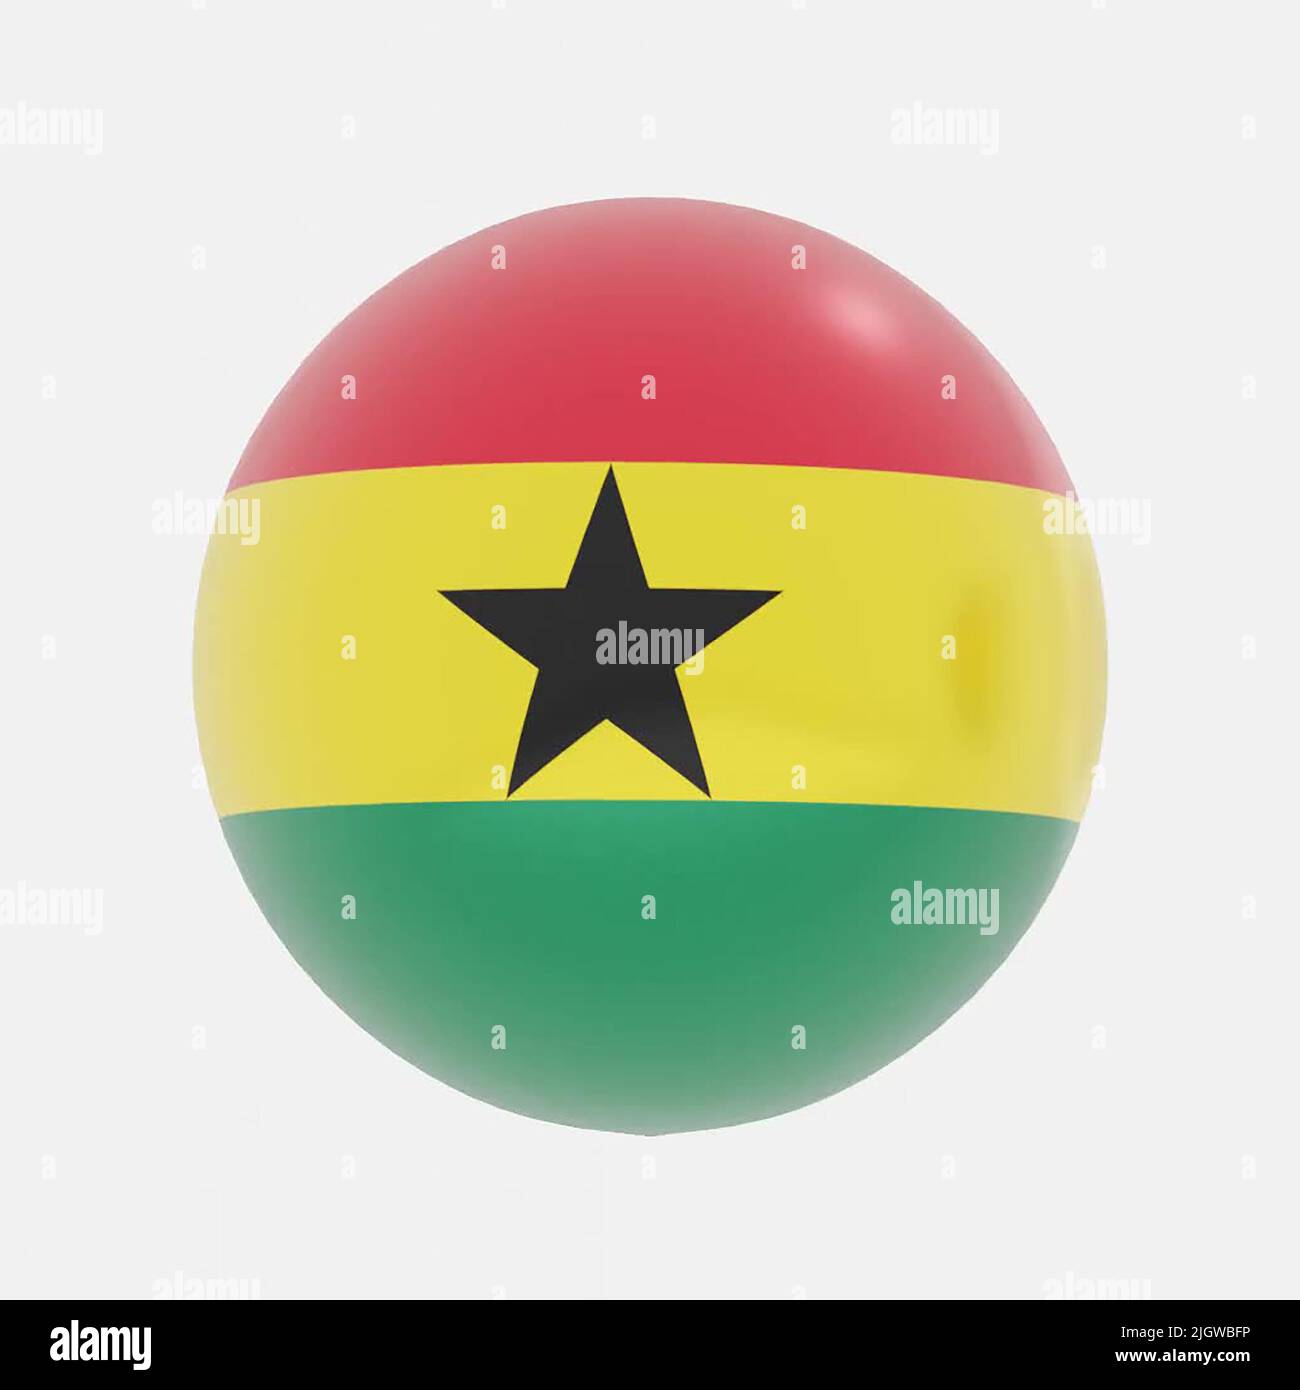 3d render of globe in Ghana flag for icon or symbol. Stock Photo